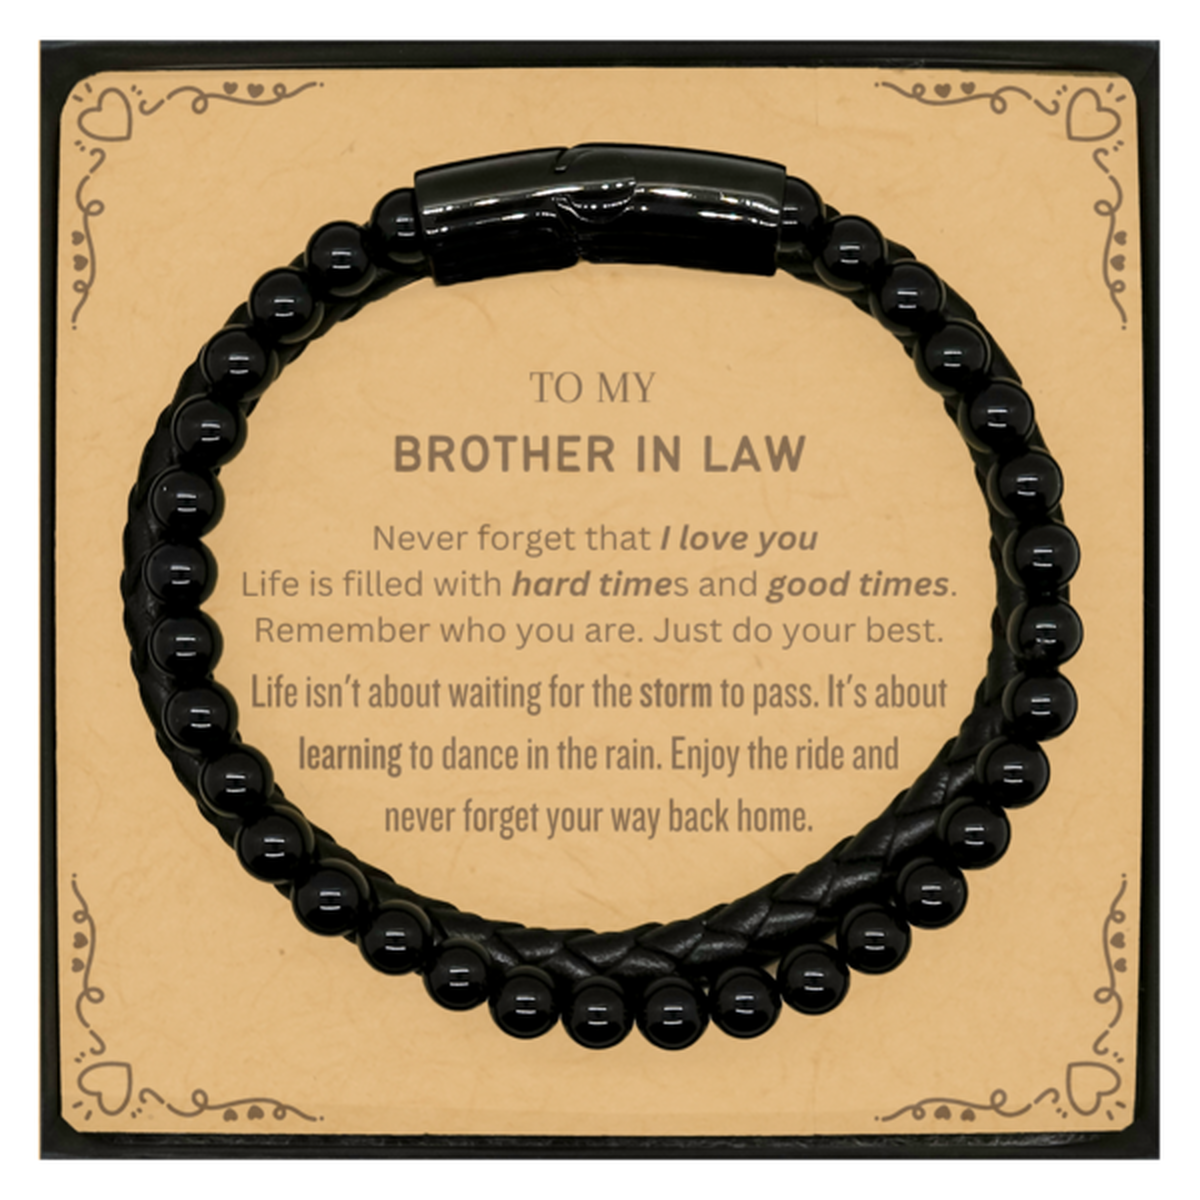 Christmas Brother In Law Stone Leather Bracelets Gifts, To My Brother In Law Birthday Thank You Gifts For Brother In Law, Graduation Unique Gifts For Brother In Law To My Brother In Law Never forget that I love you life is filled with hard times and good